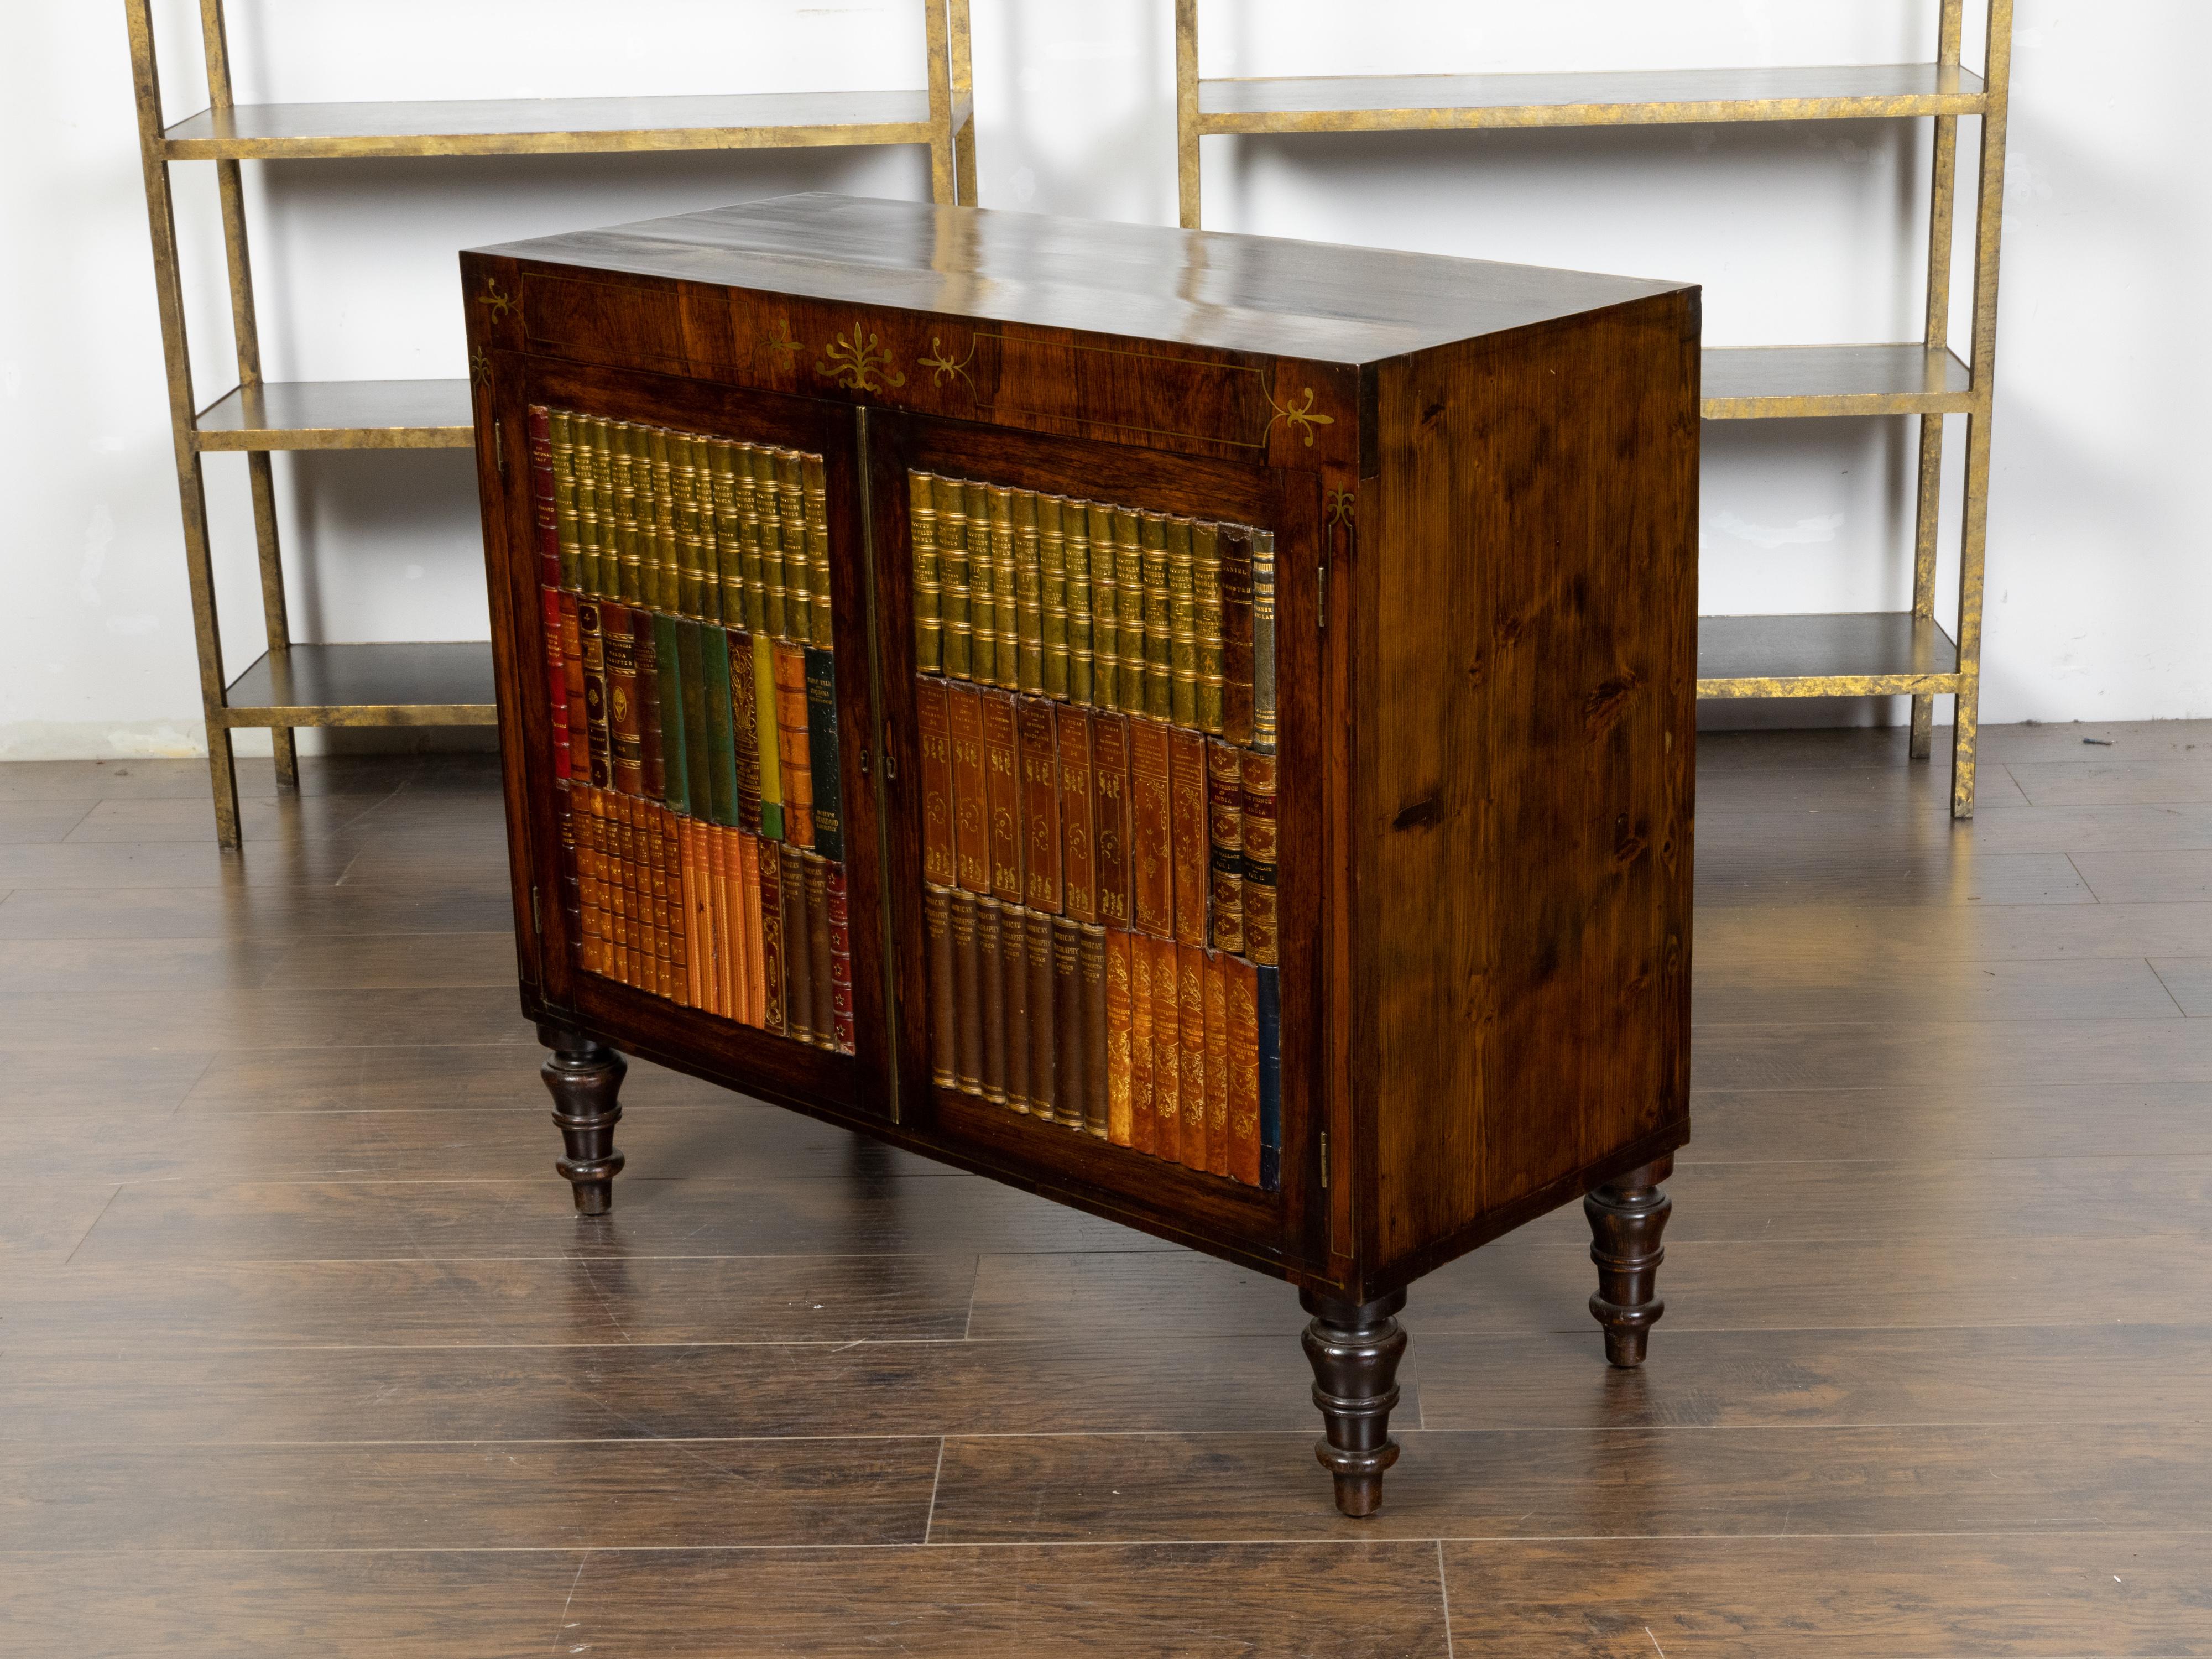 English 1840s Mahogany Cabinet with Leather Faux Books and Foliage Inlay In Good Condition For Sale In Atlanta, GA